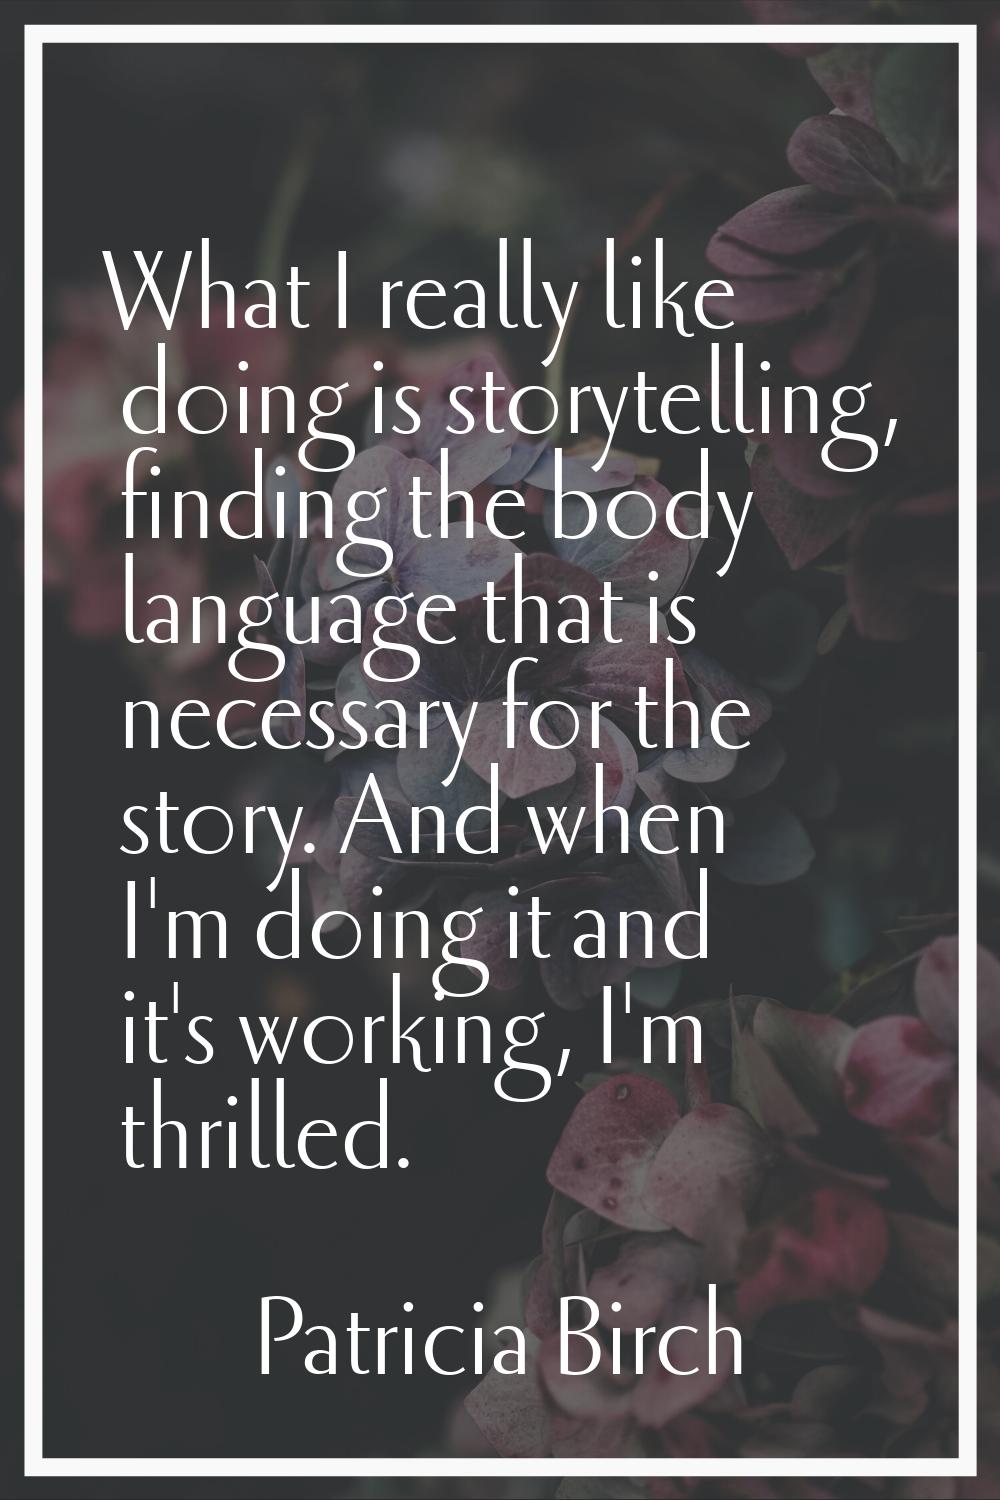 What I really like doing is storytelling, finding the body language that is necessary for the story